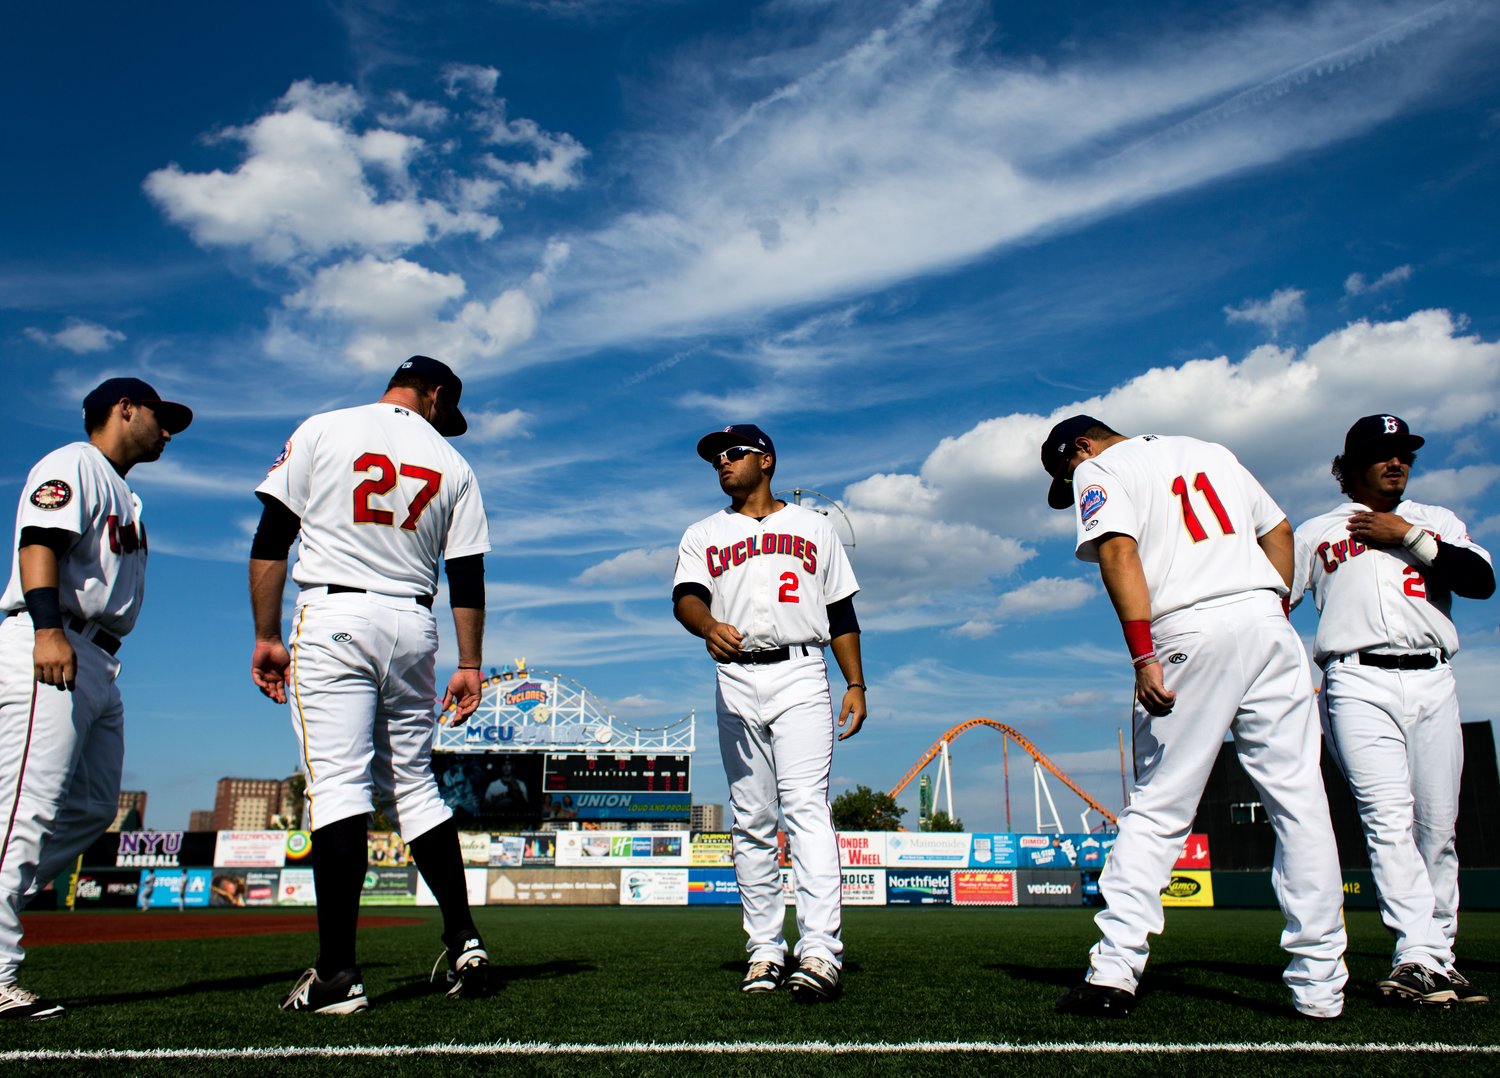 Members of the Brooklyn Cyclones stretching at their field in Brooklyn, New York. The Cyclones were the first professional baseball team to return to Brooklyn after the Dodgers left in 1958.